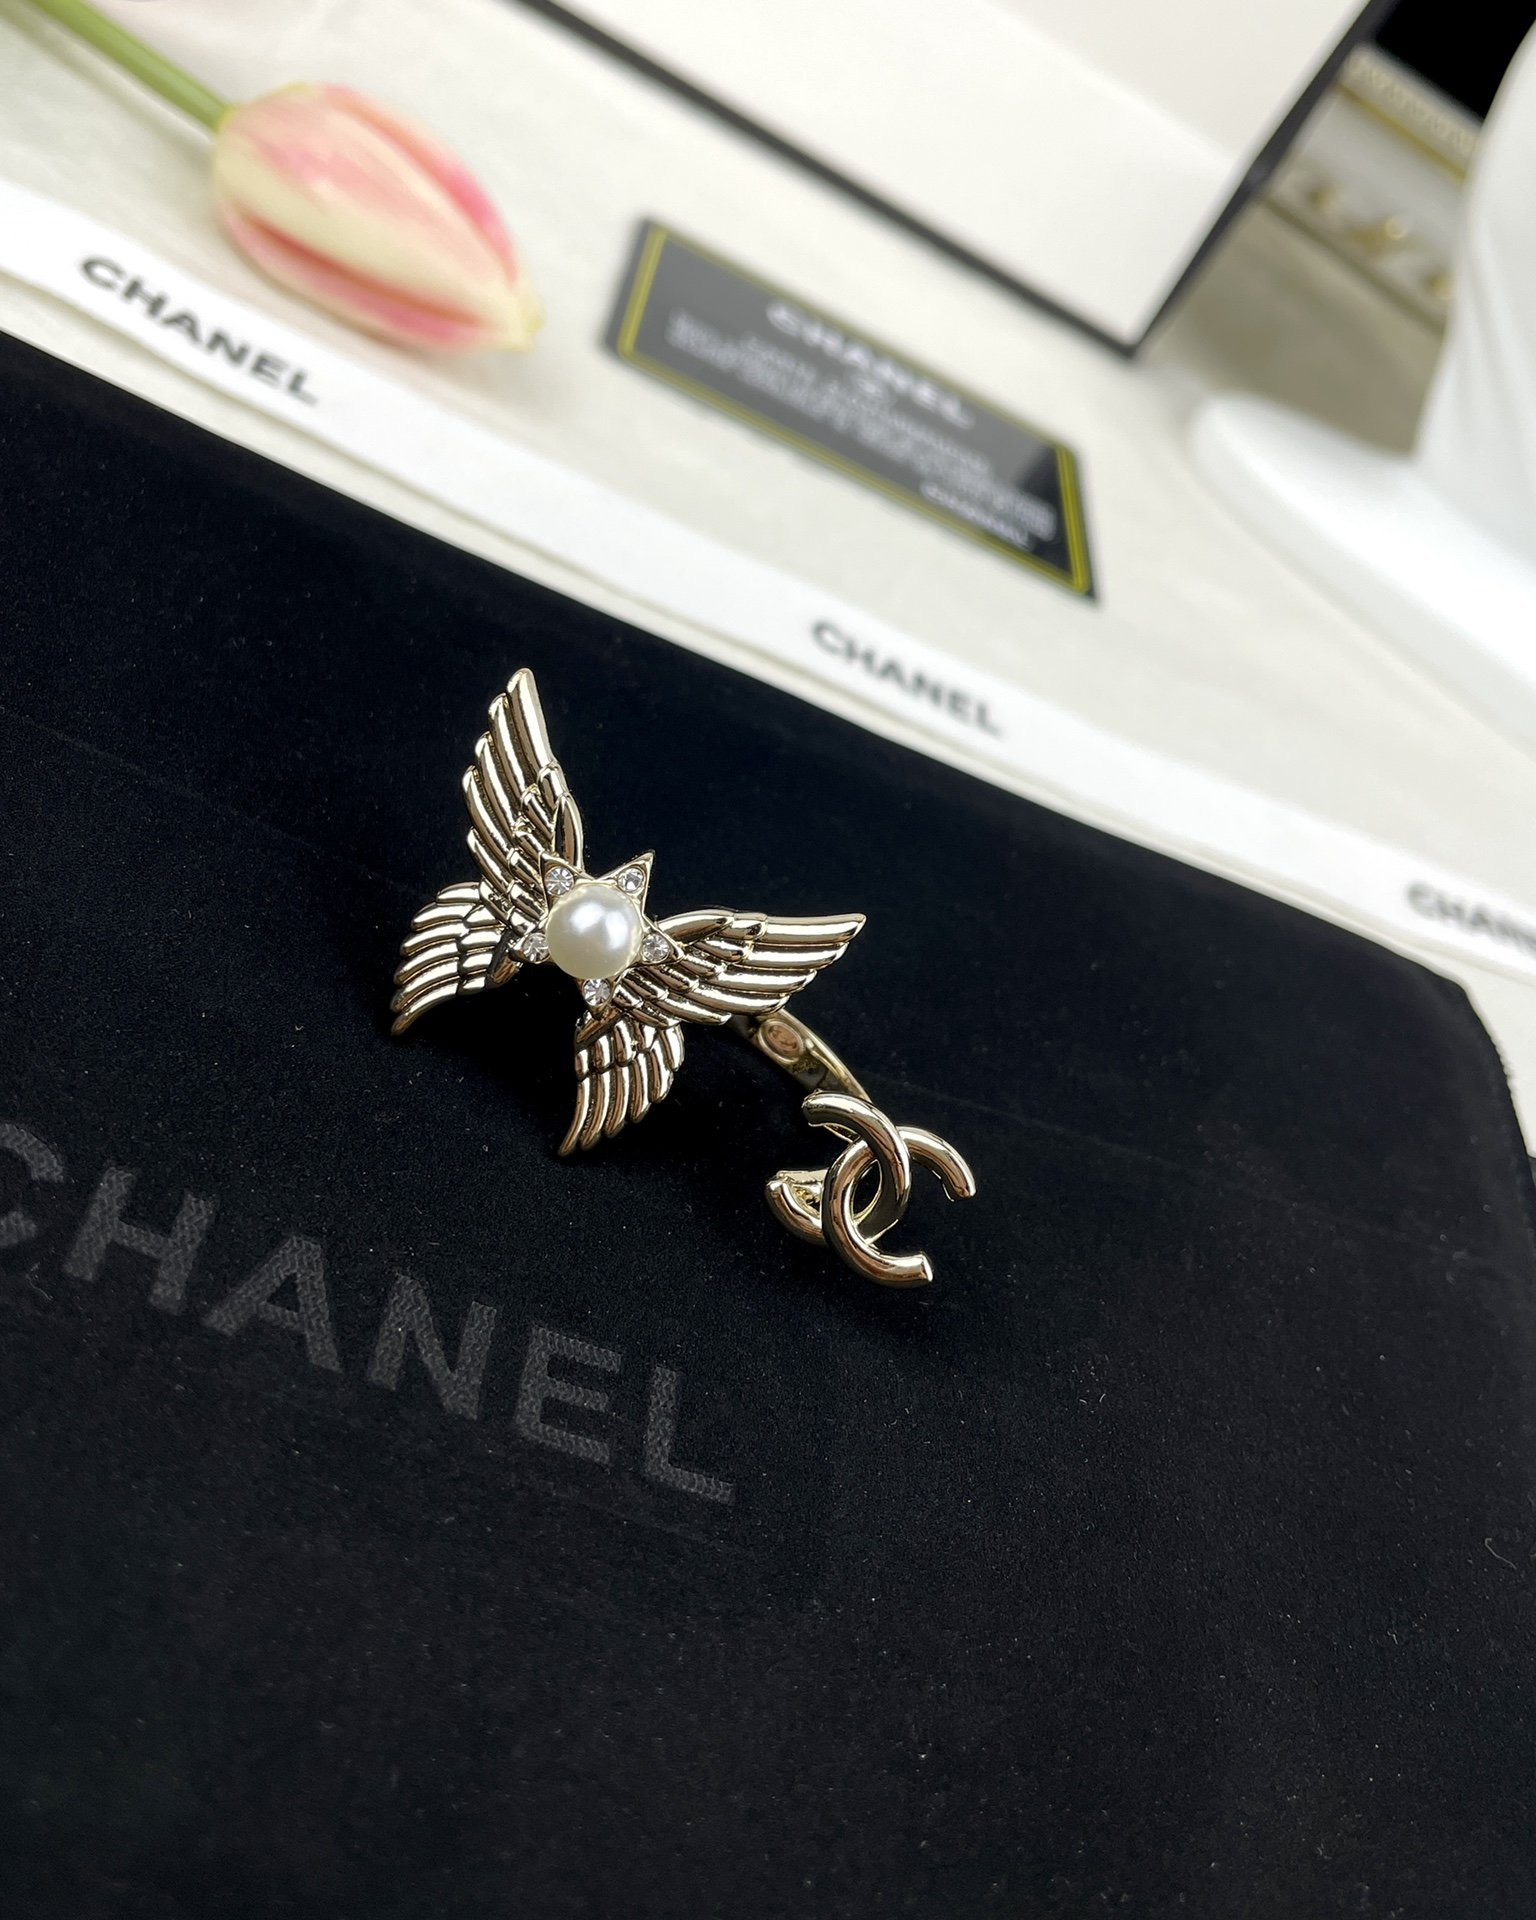 Chanel butterfly shaped open ring